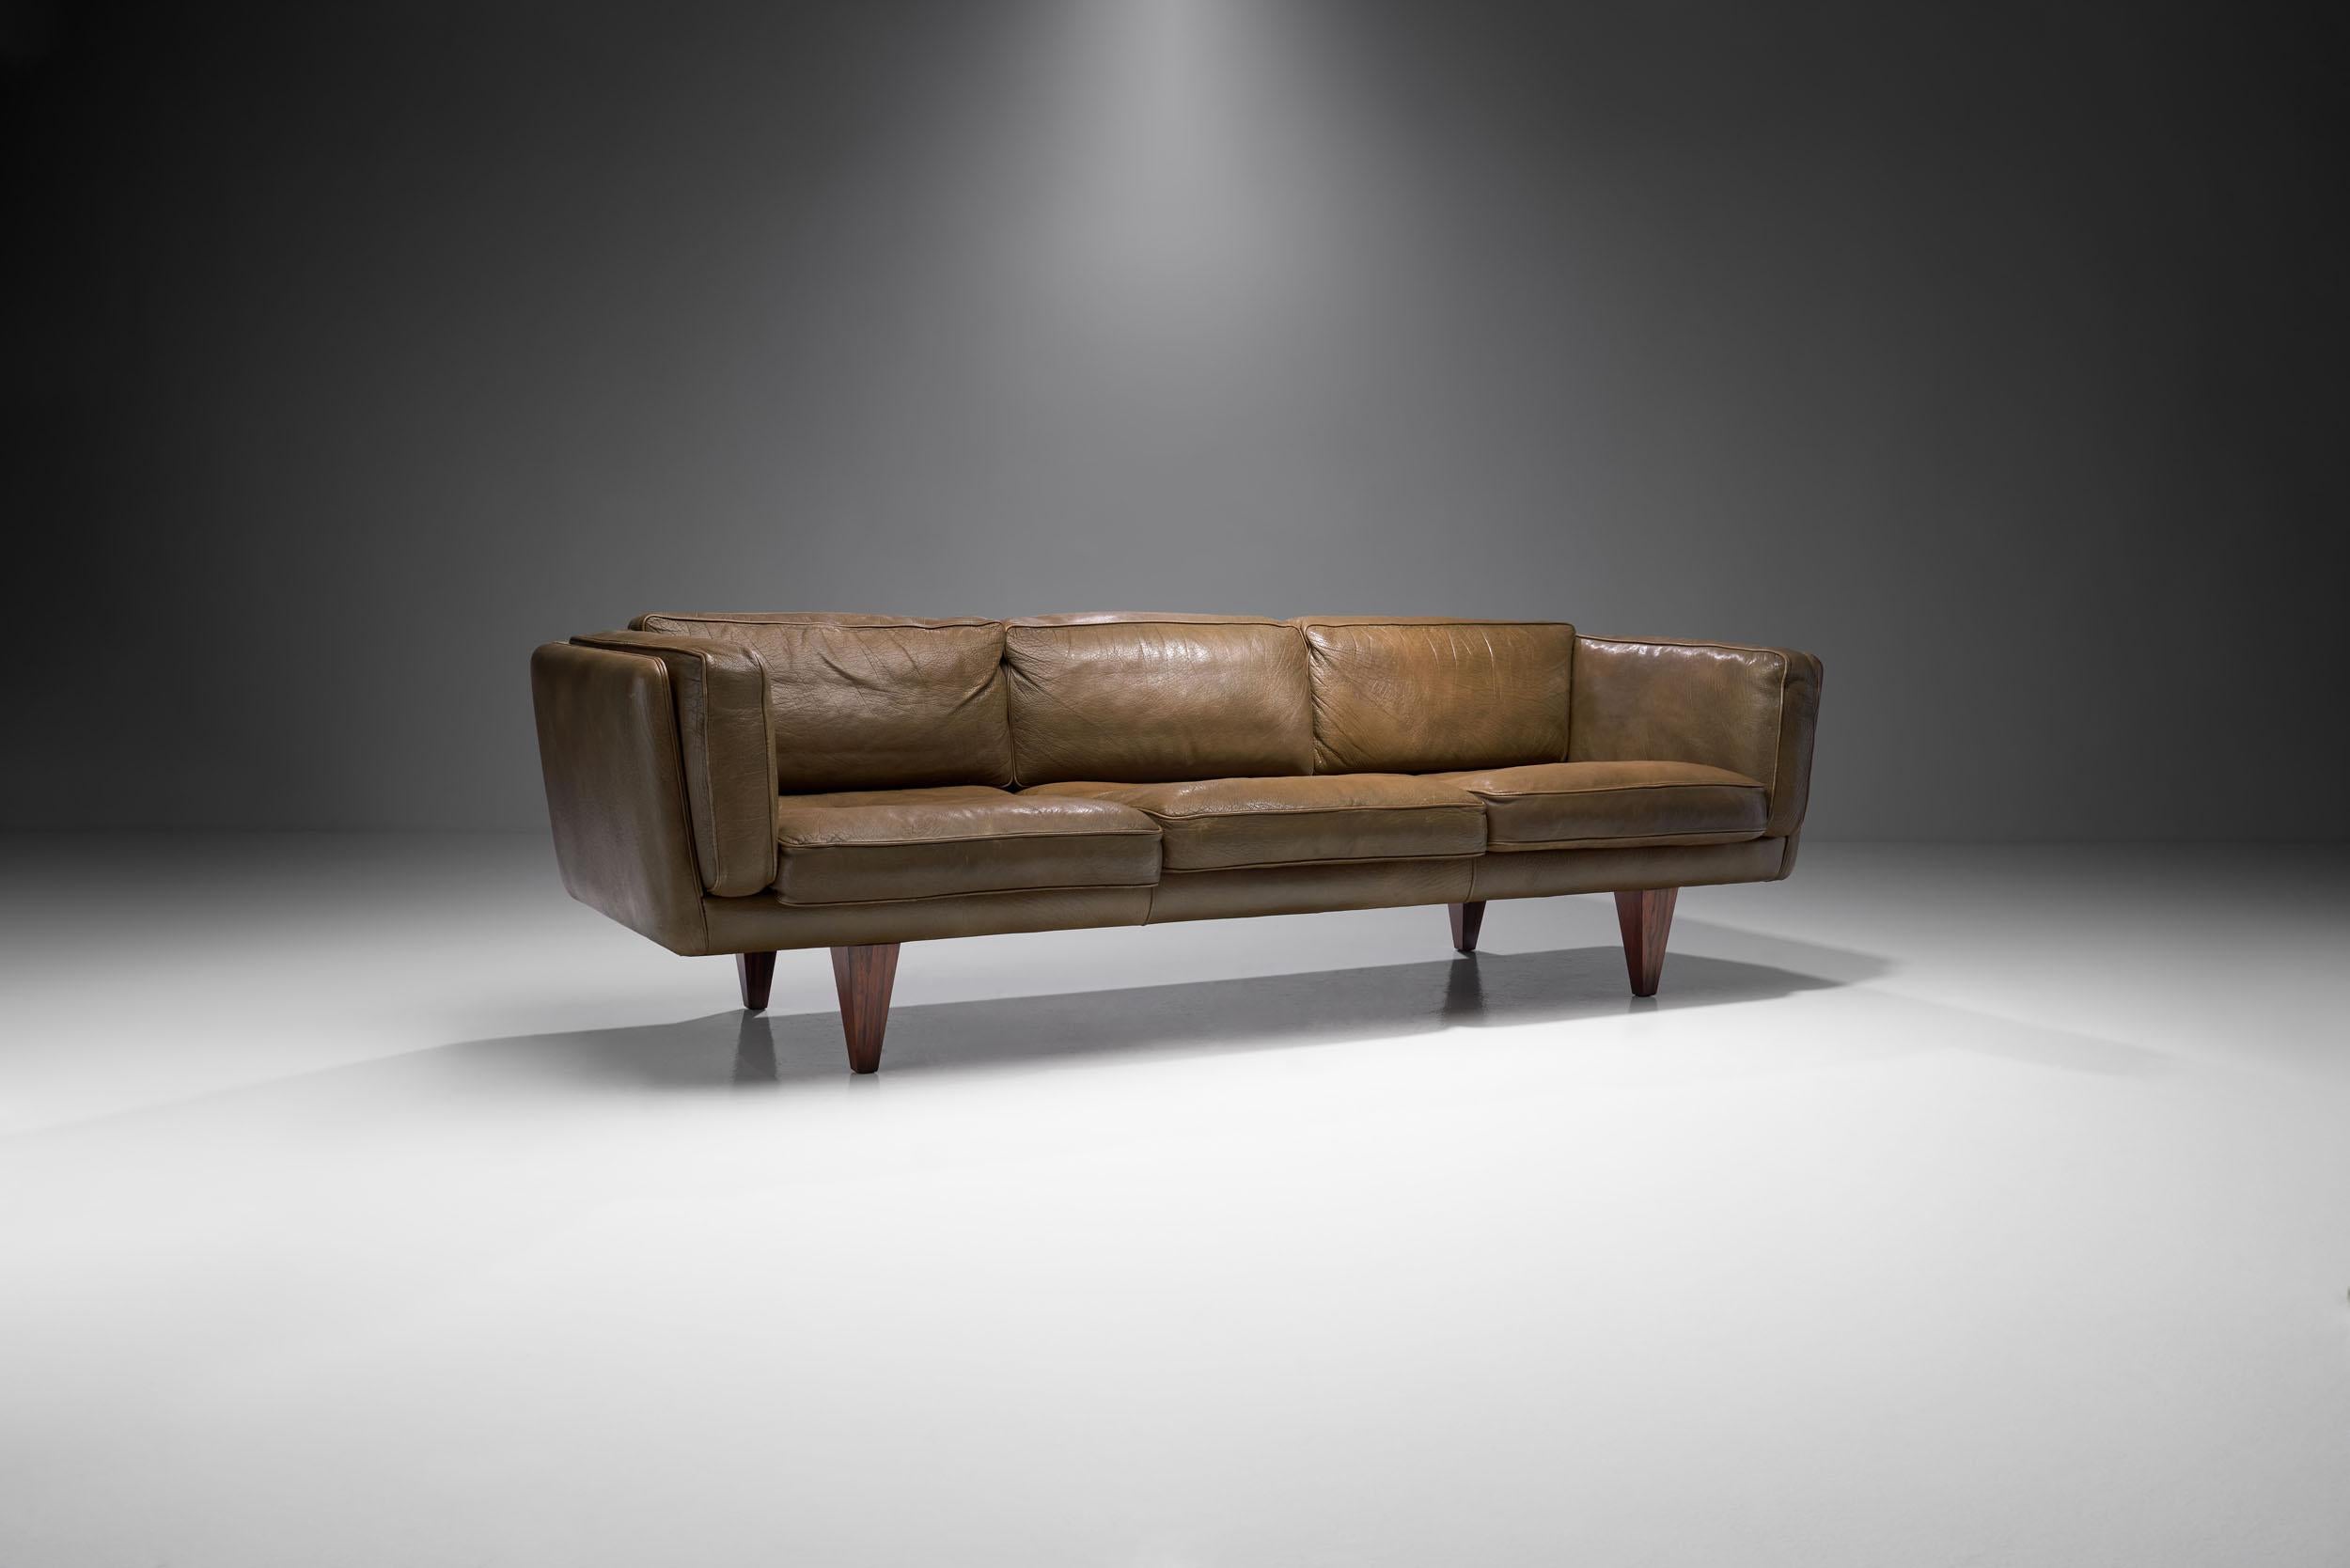 This free-standing sofa, better known as “Model V11” is considered among the masterpiece designs of Illum Wikkelsø. The Danish designer created the “V11” series in 1965 whilst working with master cabinetmaker Holger Christiansen in